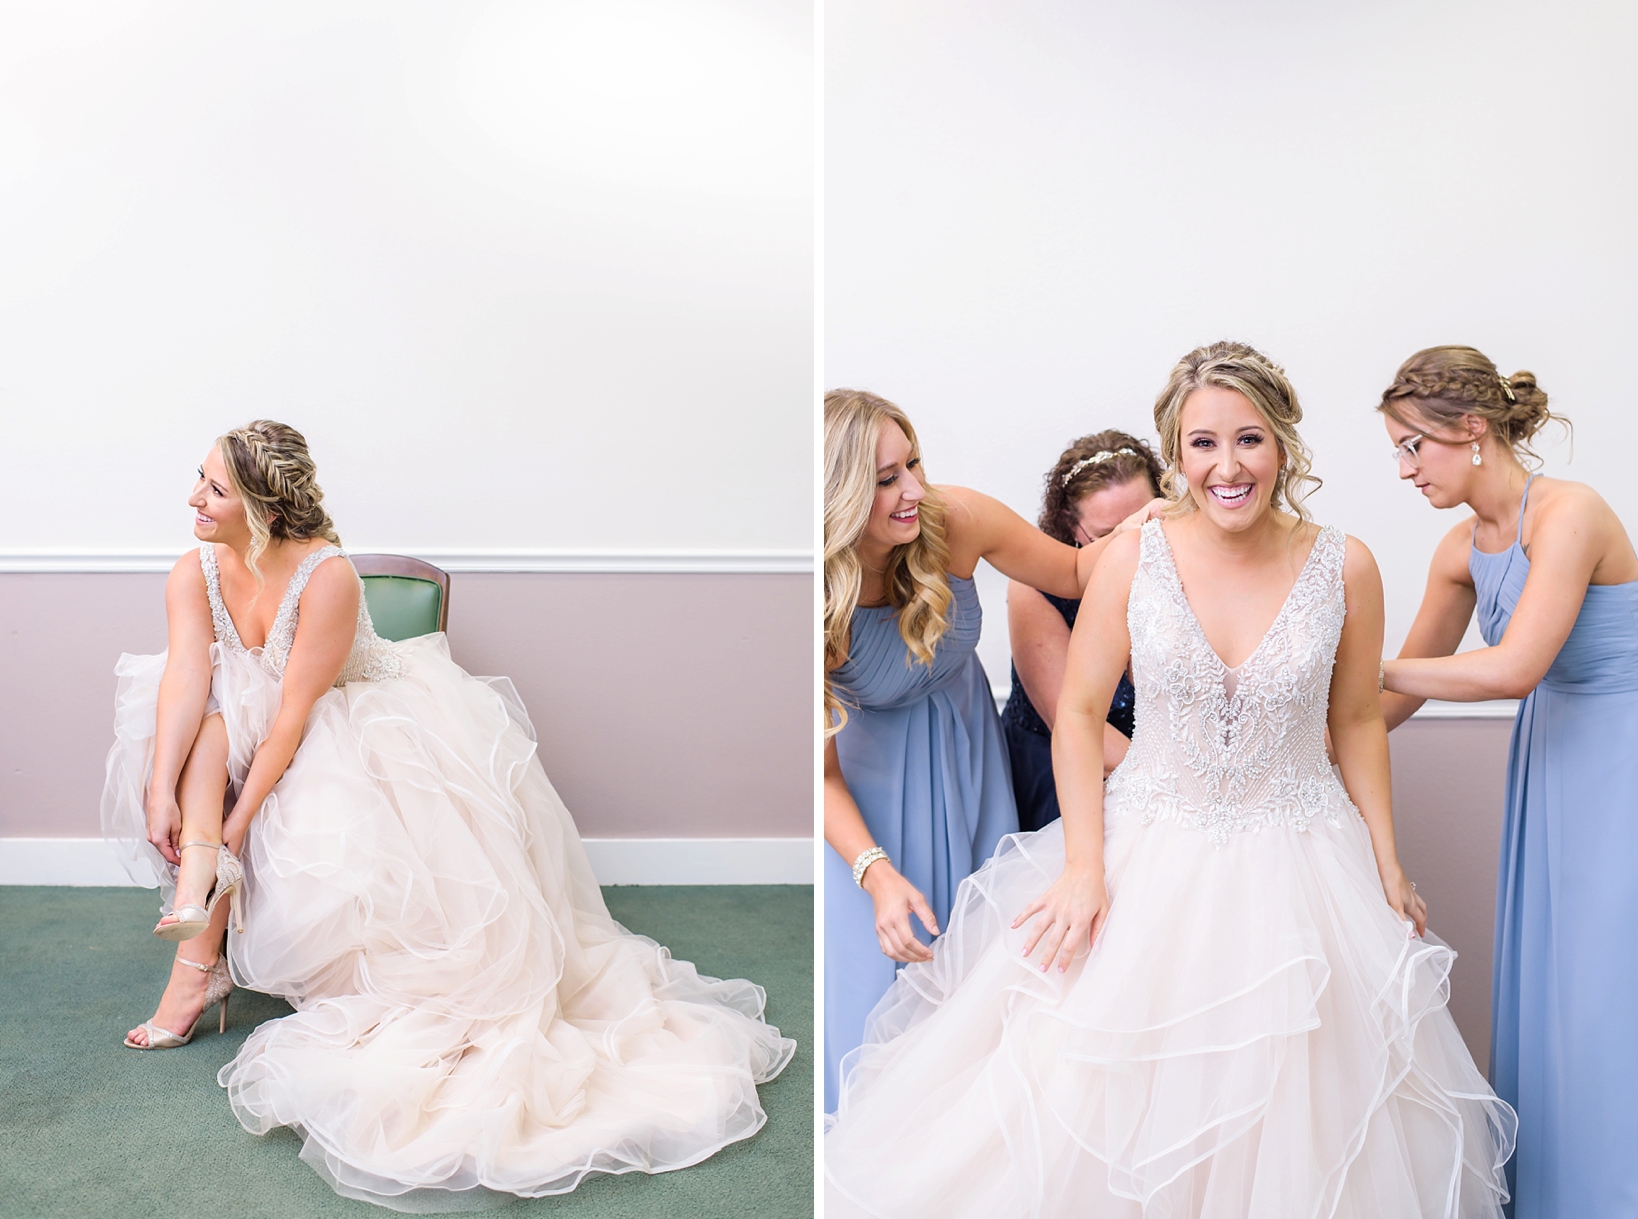 Bride putting her shoes on and being helped by her bridesmaids while wearing a big smile